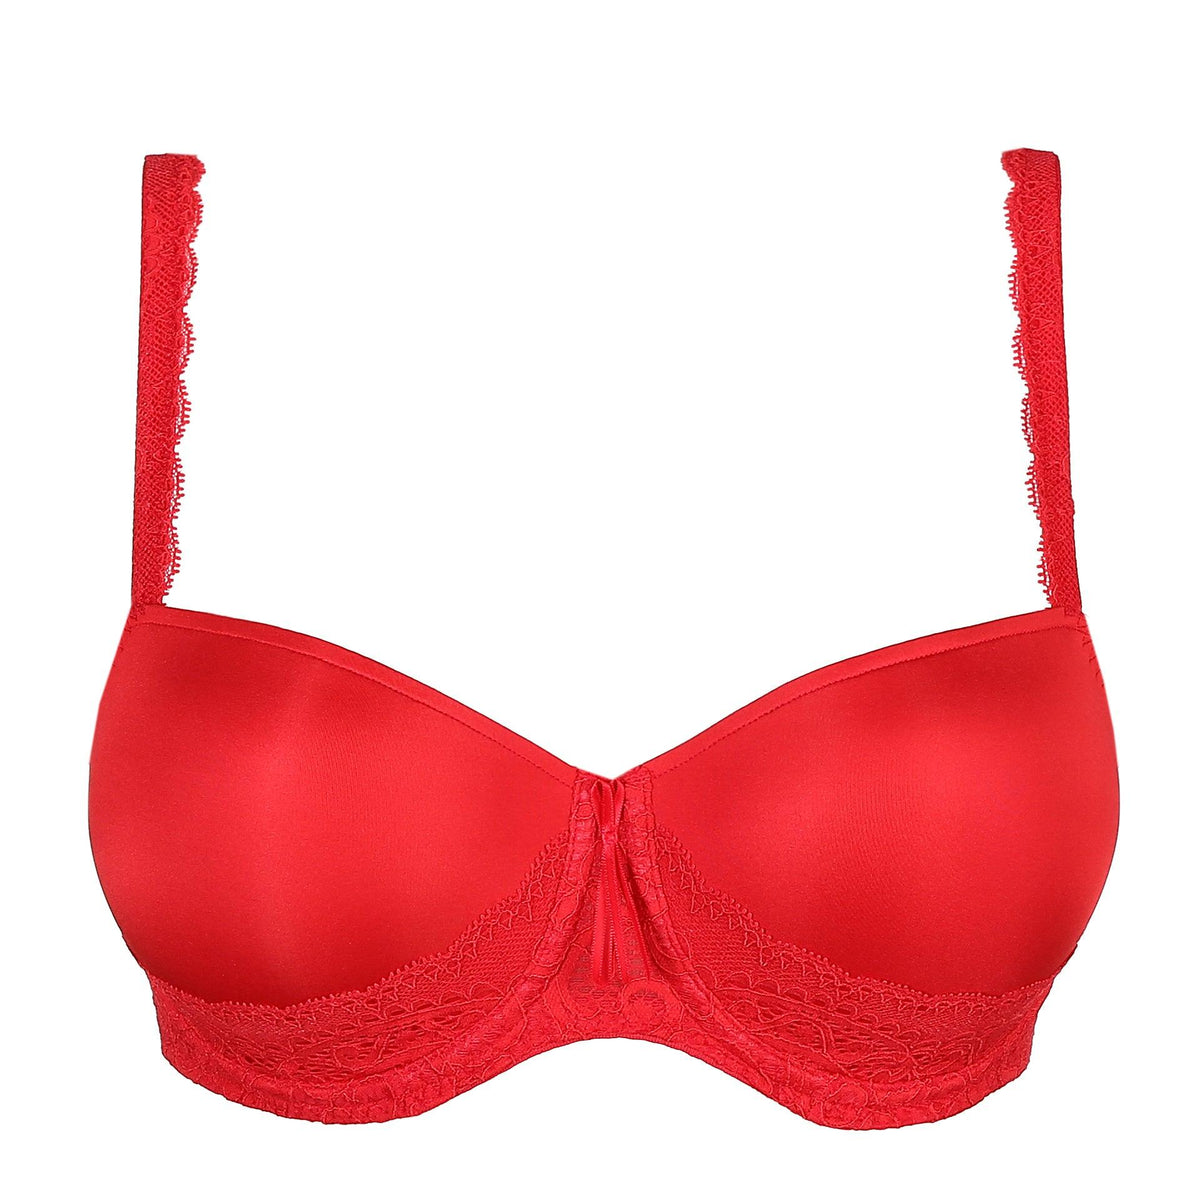 CHAINSTORE RED LACE UNDERWIRED MOULDED PUSH UP BALCONY BRA SIZE